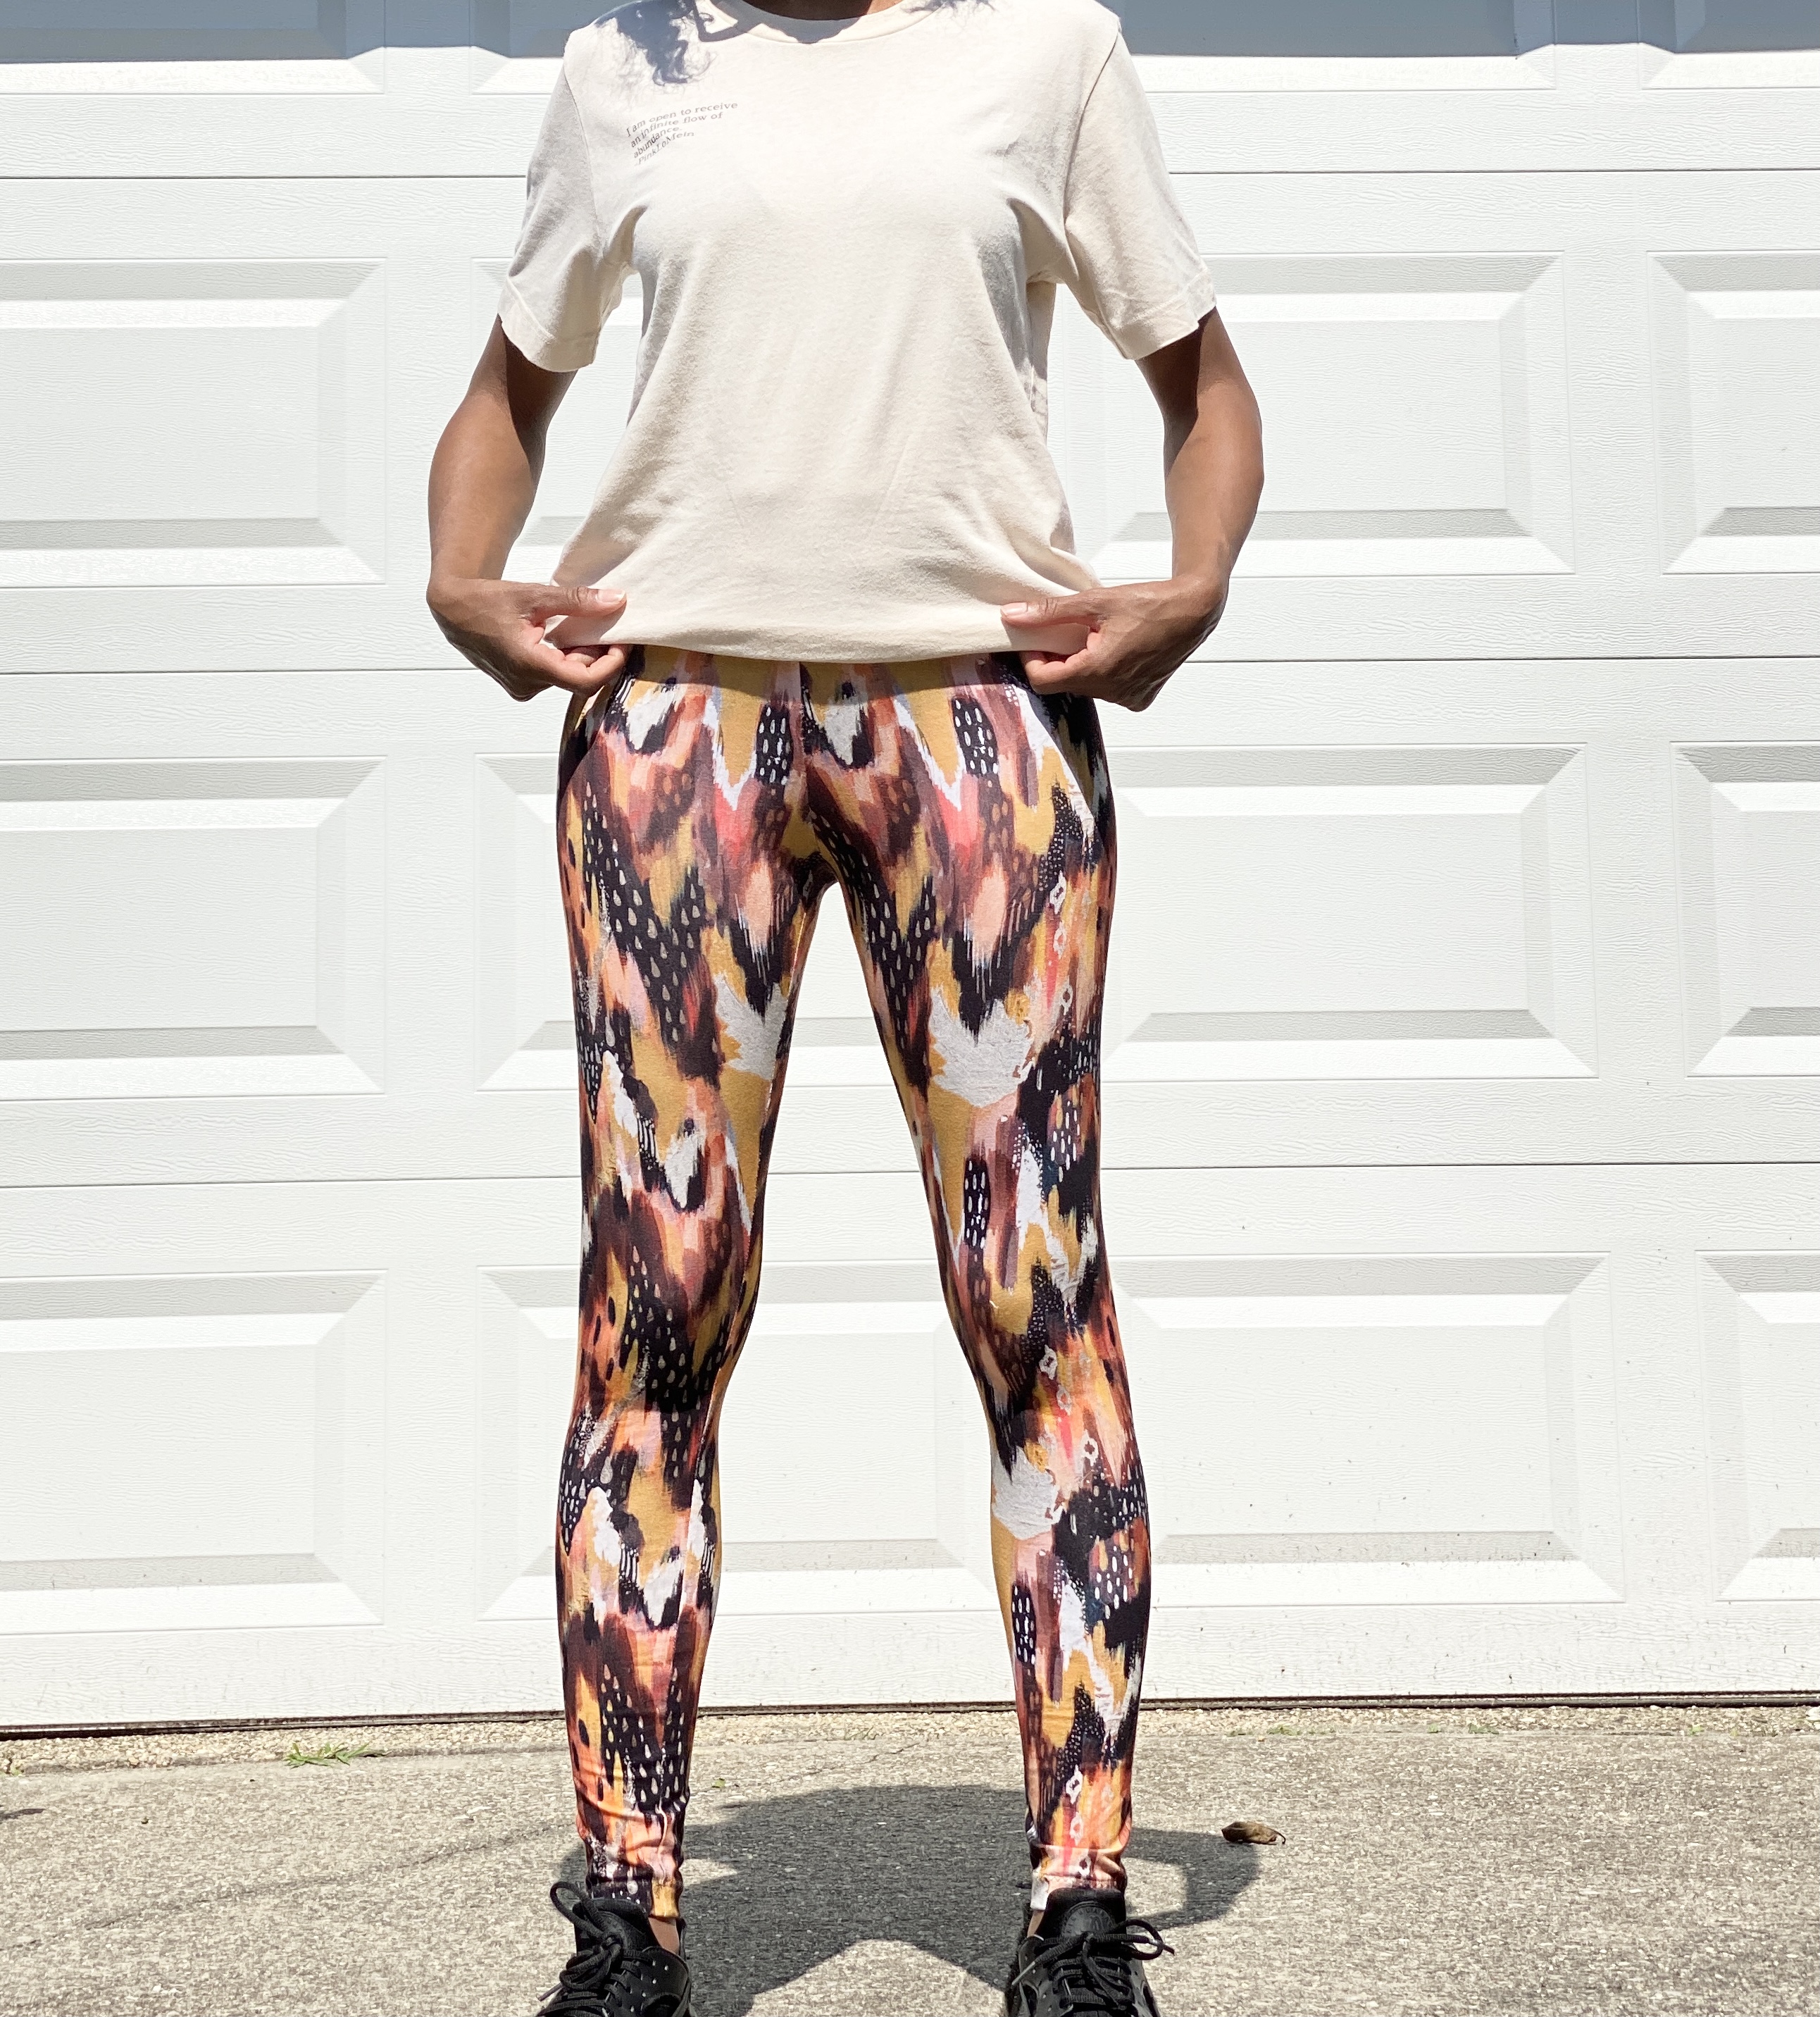 Jersey Knit Leggings: Finished Product